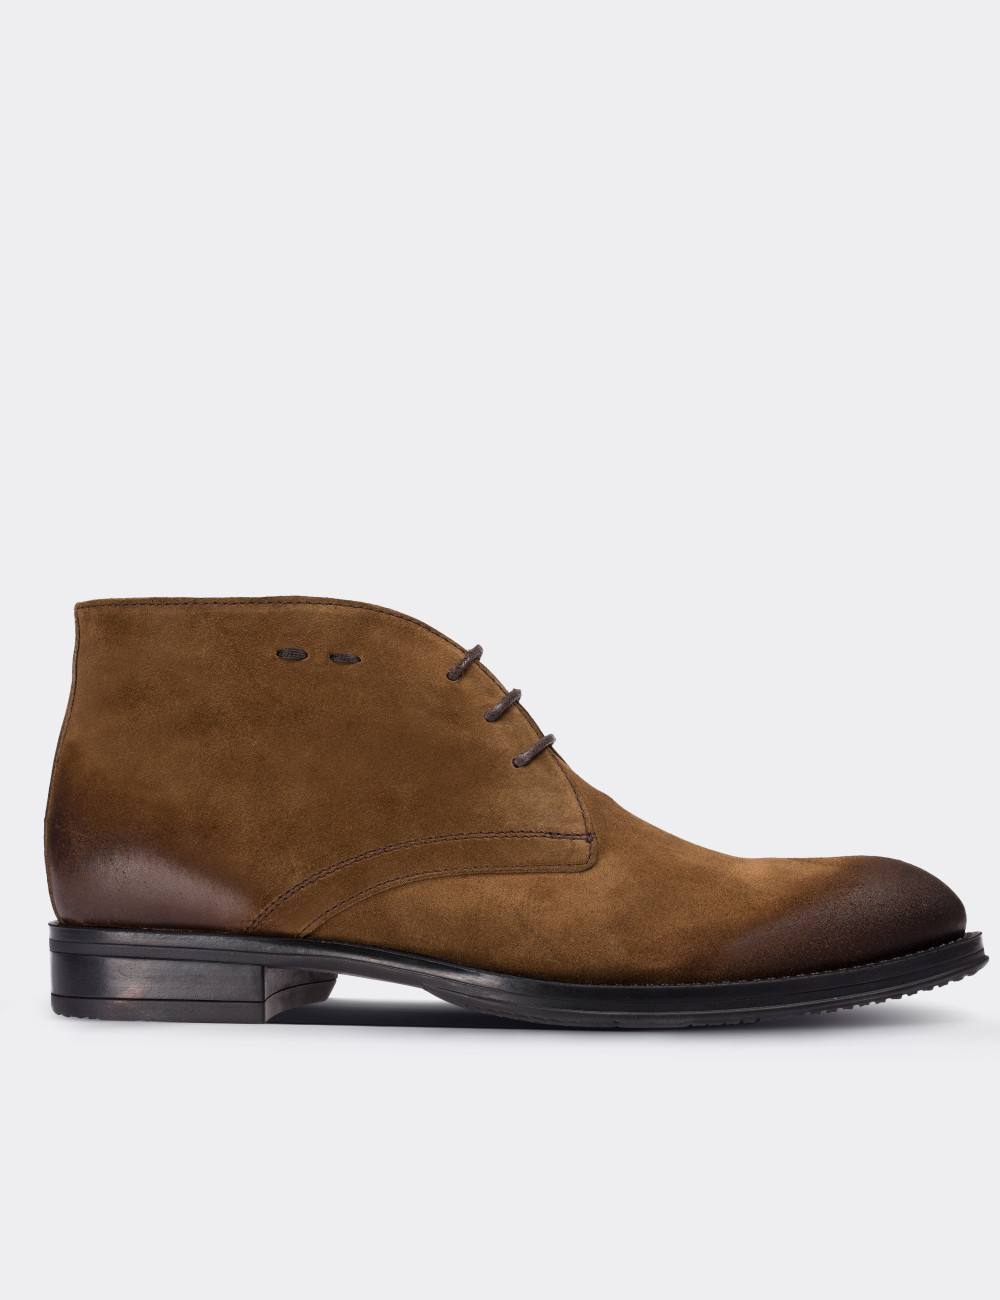 Tan Suede Leather Desert Boots - 01295MTBAC03